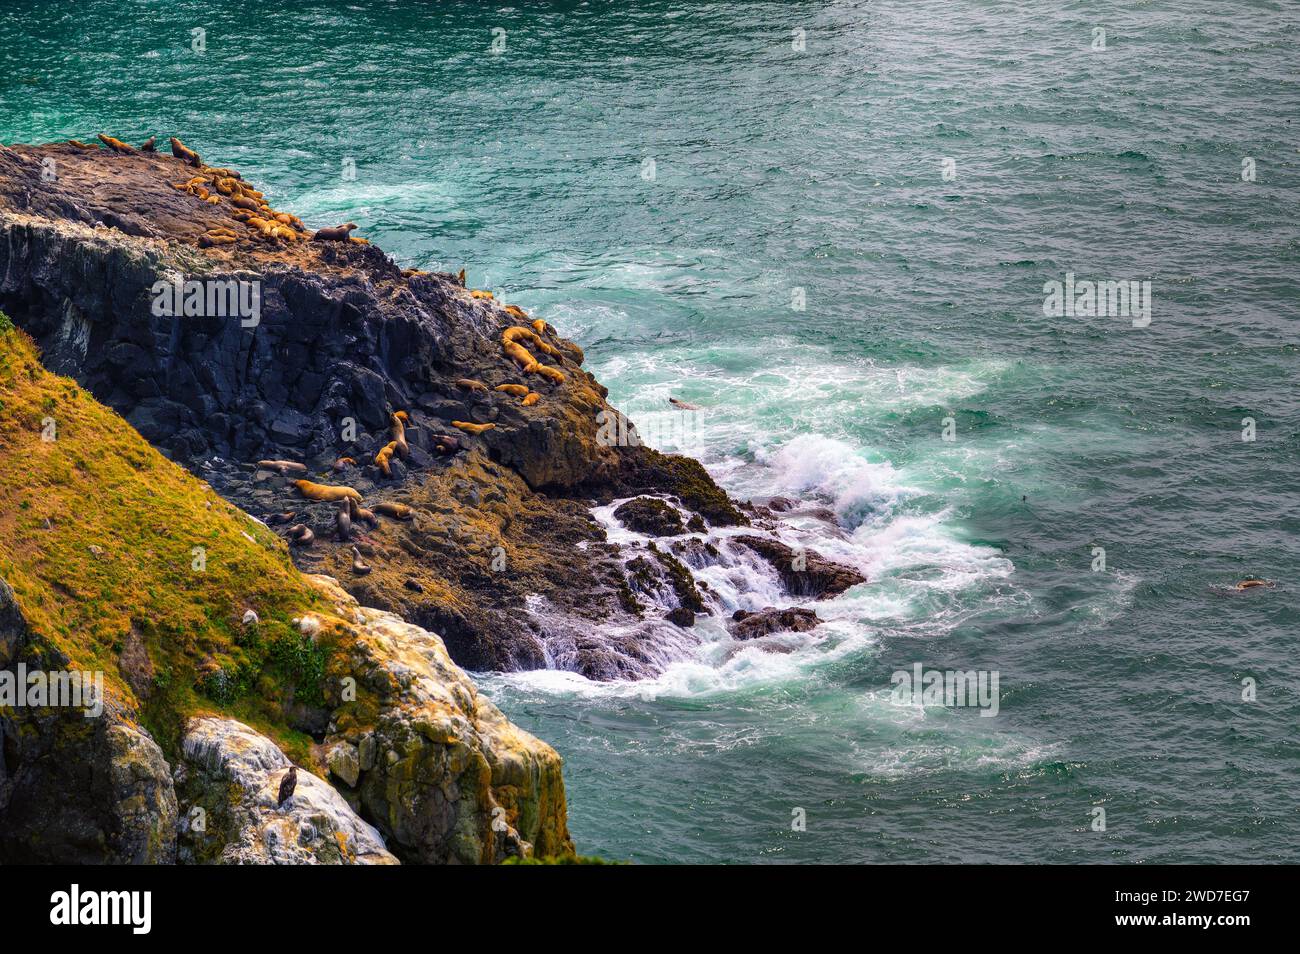 Sea lions resting on rocky cliff by Pacific ocean in Oregon Stock Photo